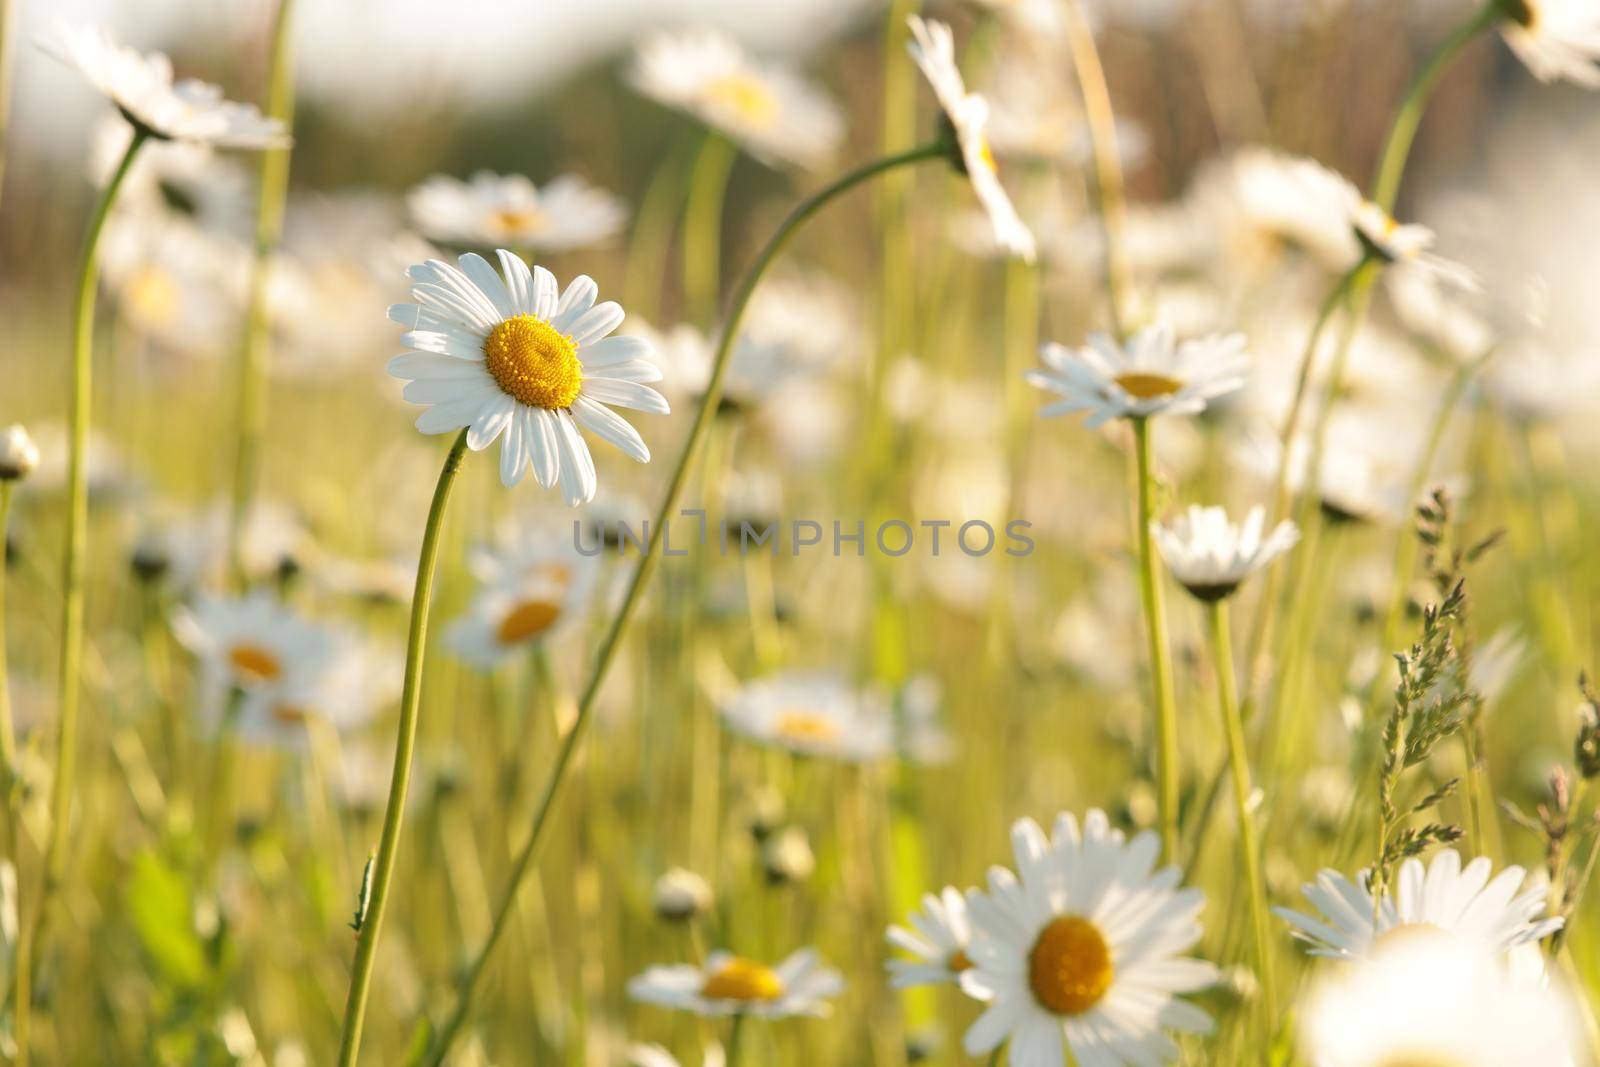 Daisies on a spring meadow at sunrise.